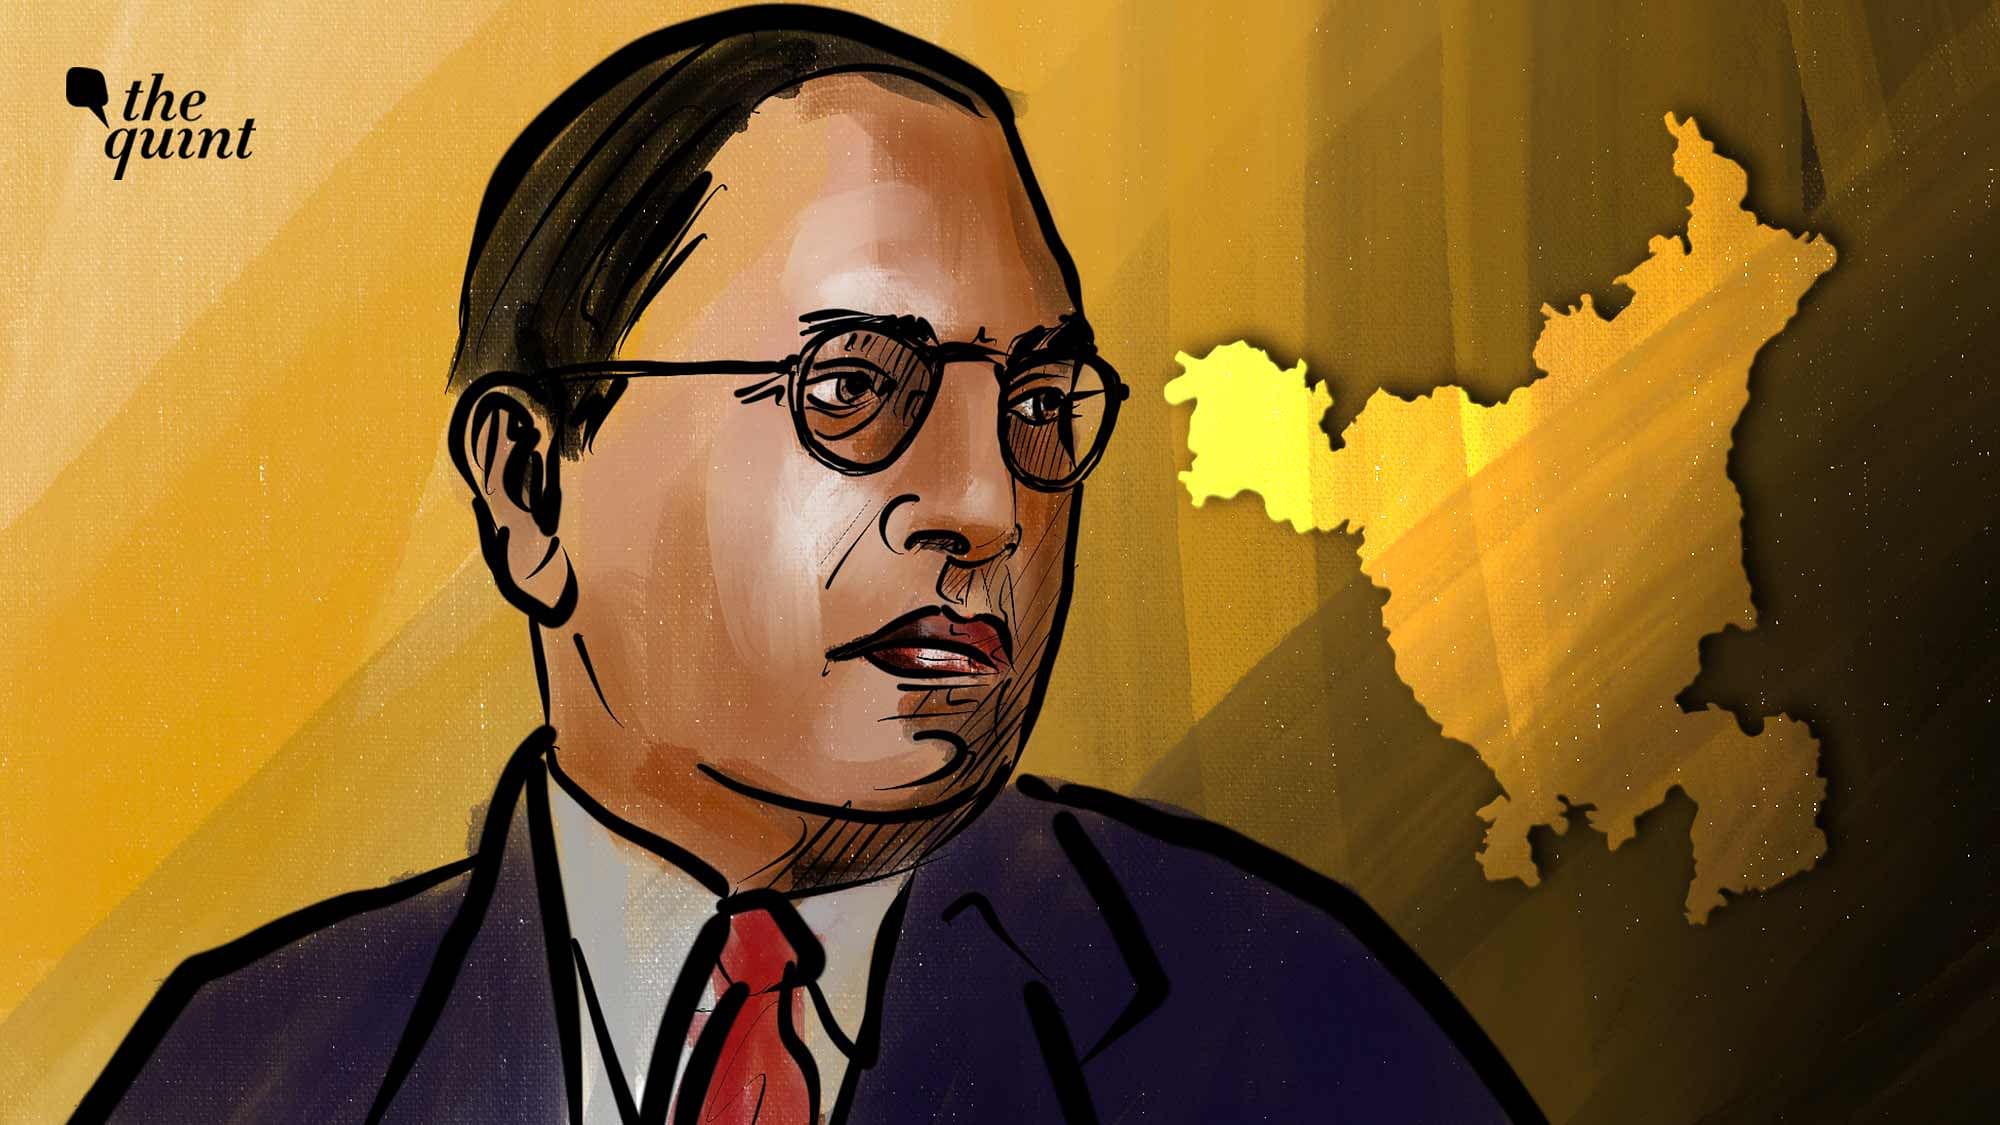 CVANU Dr. B.R. Ambedkar Picture Printed on Canvas Sheet Wall Art Painting  with Unframed (12x18inch)_202305-237 : Amazon.in: Home & Kitchen